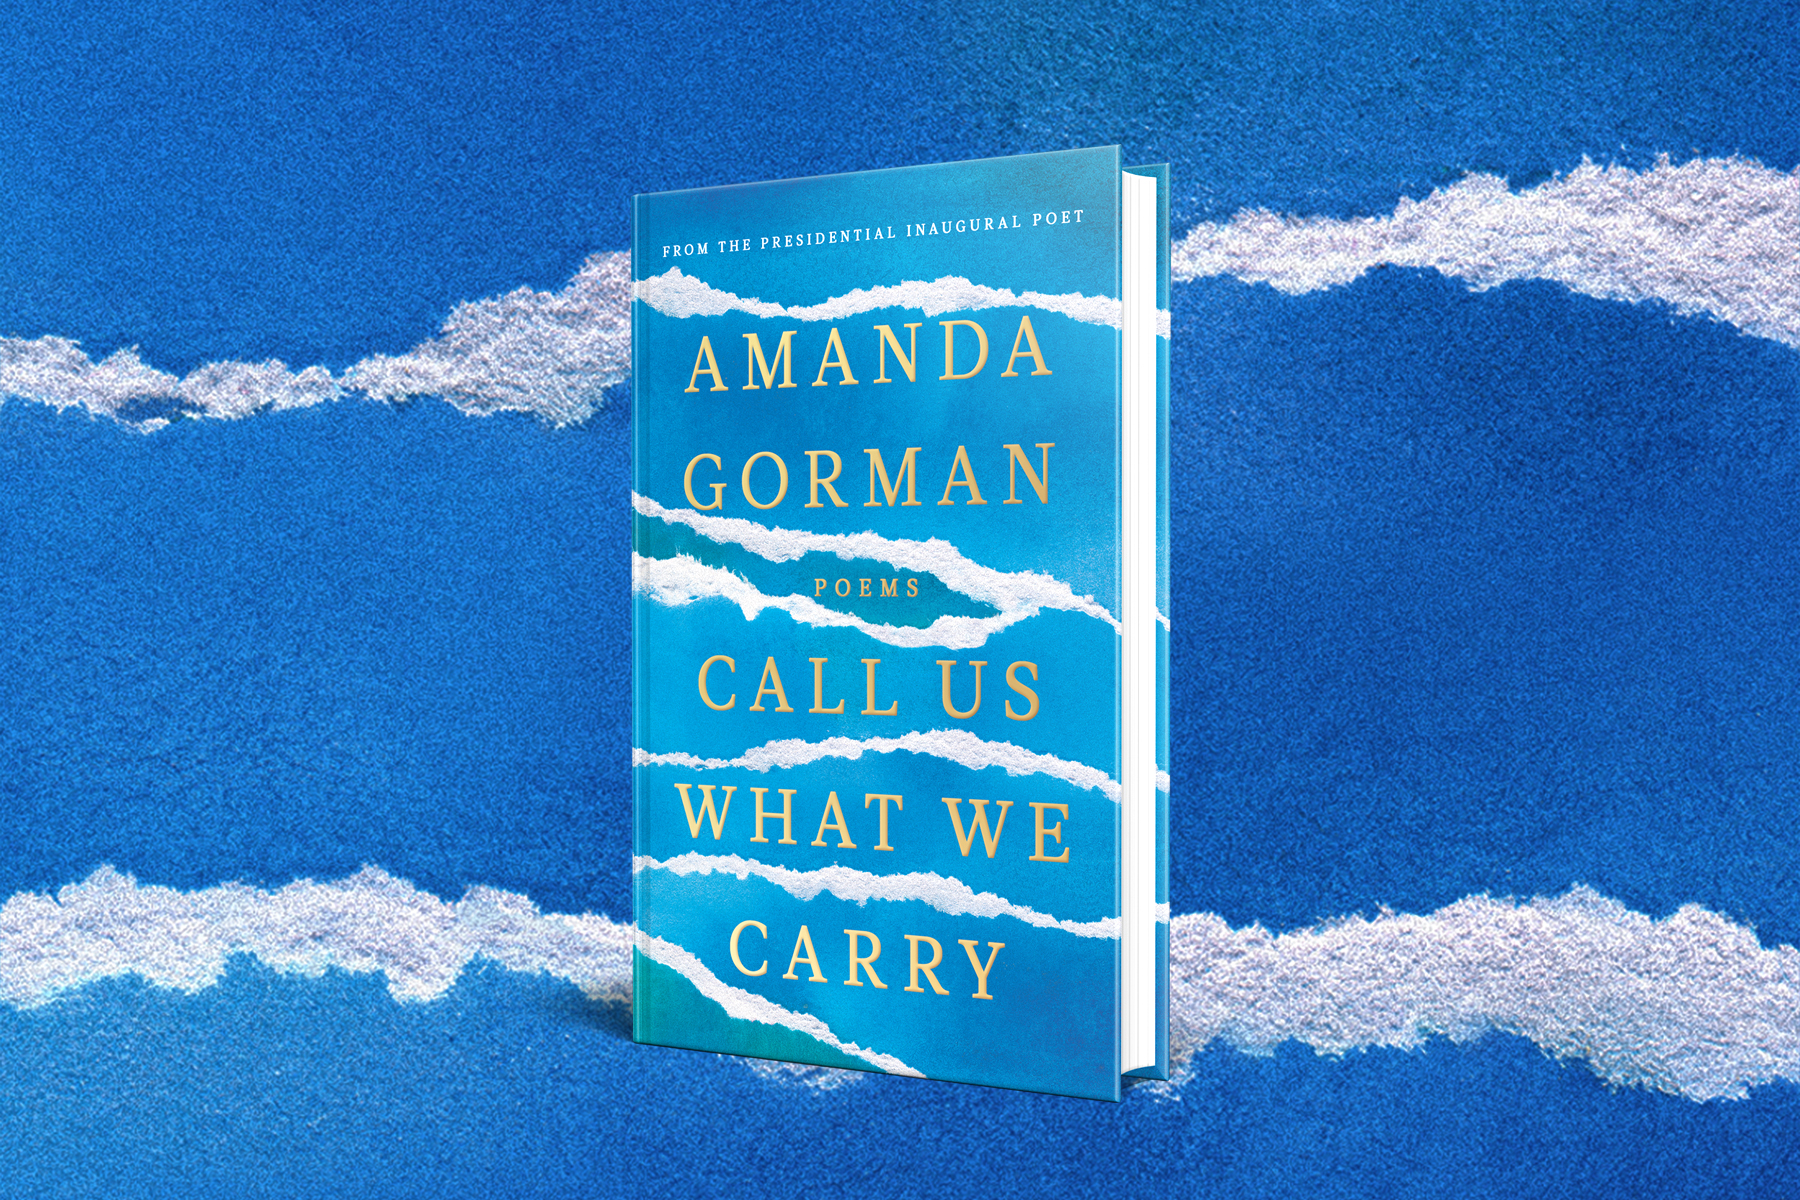 An image of Amanda Gorman's new poetry collection, Call Us What We Carry, against a blue and white background.